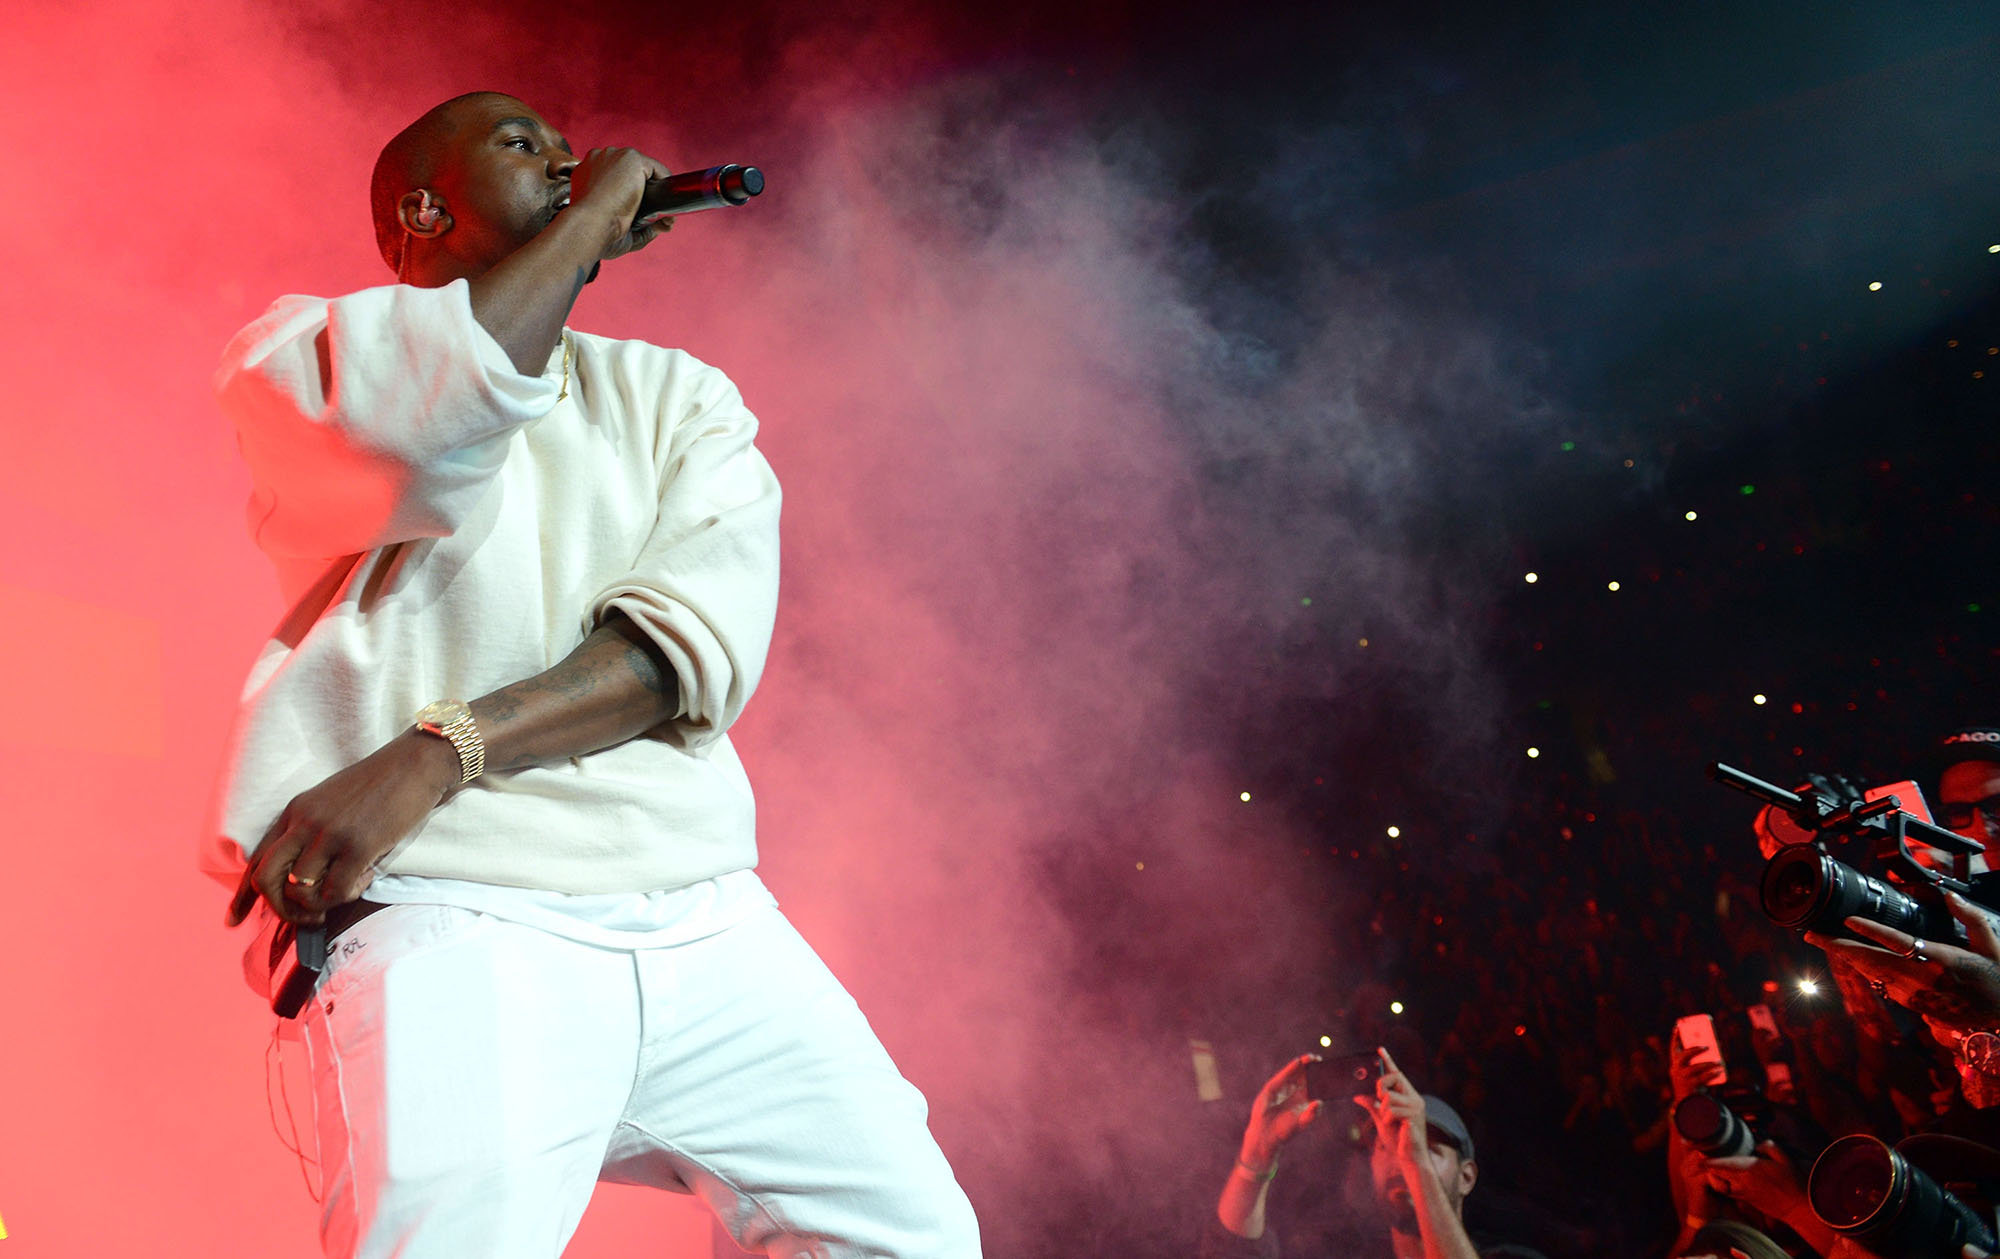 ANAHEIM, CA - JUNE 03:  Rapper Kanye West performs onstage at the Power 106 Powerhouse show at Honda Center (Photo by Scott Dudelson/FilmMagic) (Scott Dudelson&mdash;FilmMagic)